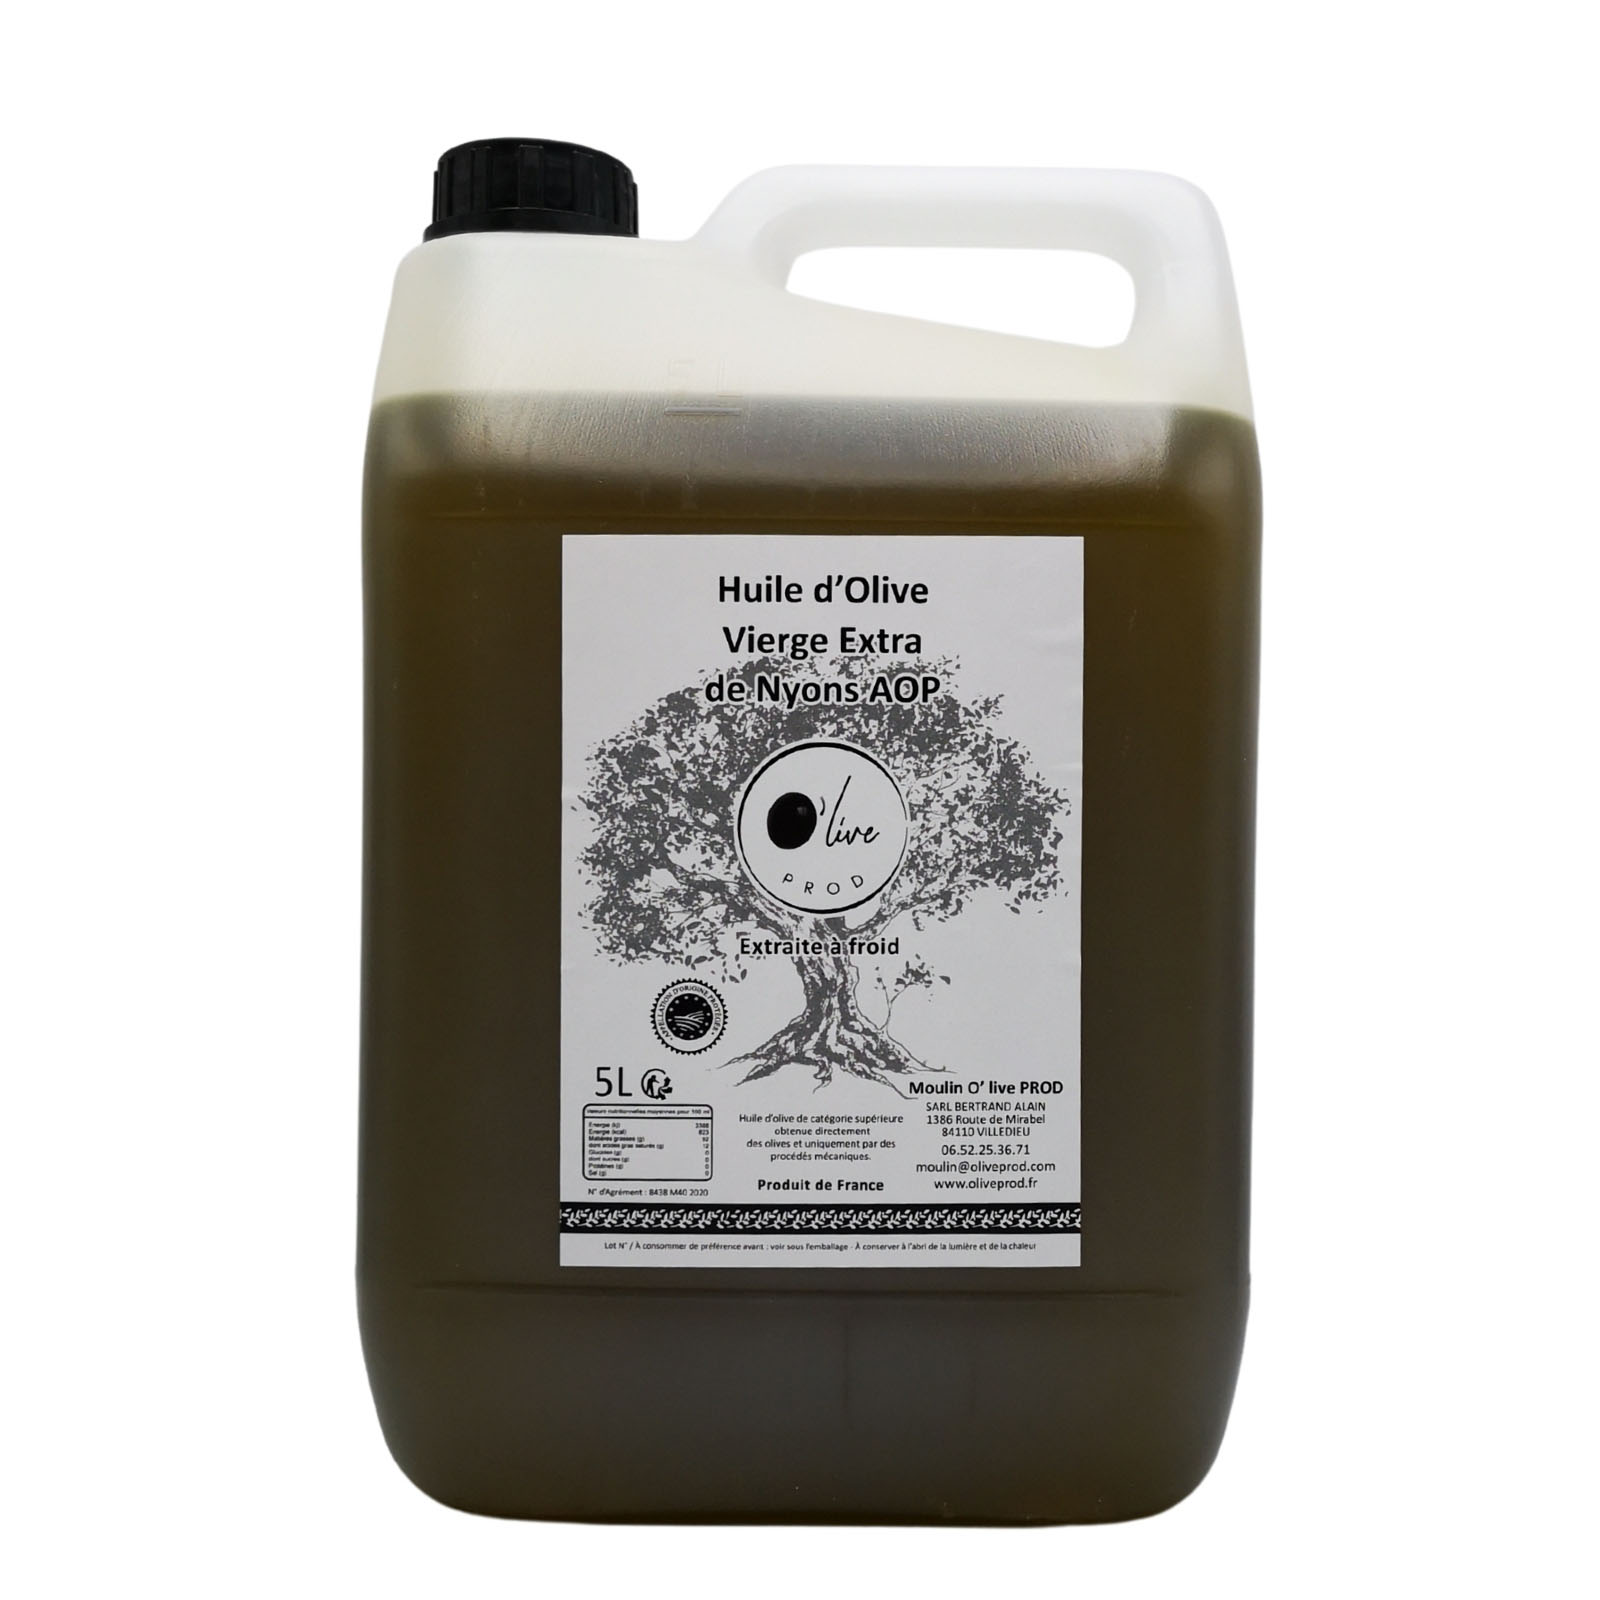 Huile d'olive AOP Nyons Vierge Extra - 5L - O' live PROD